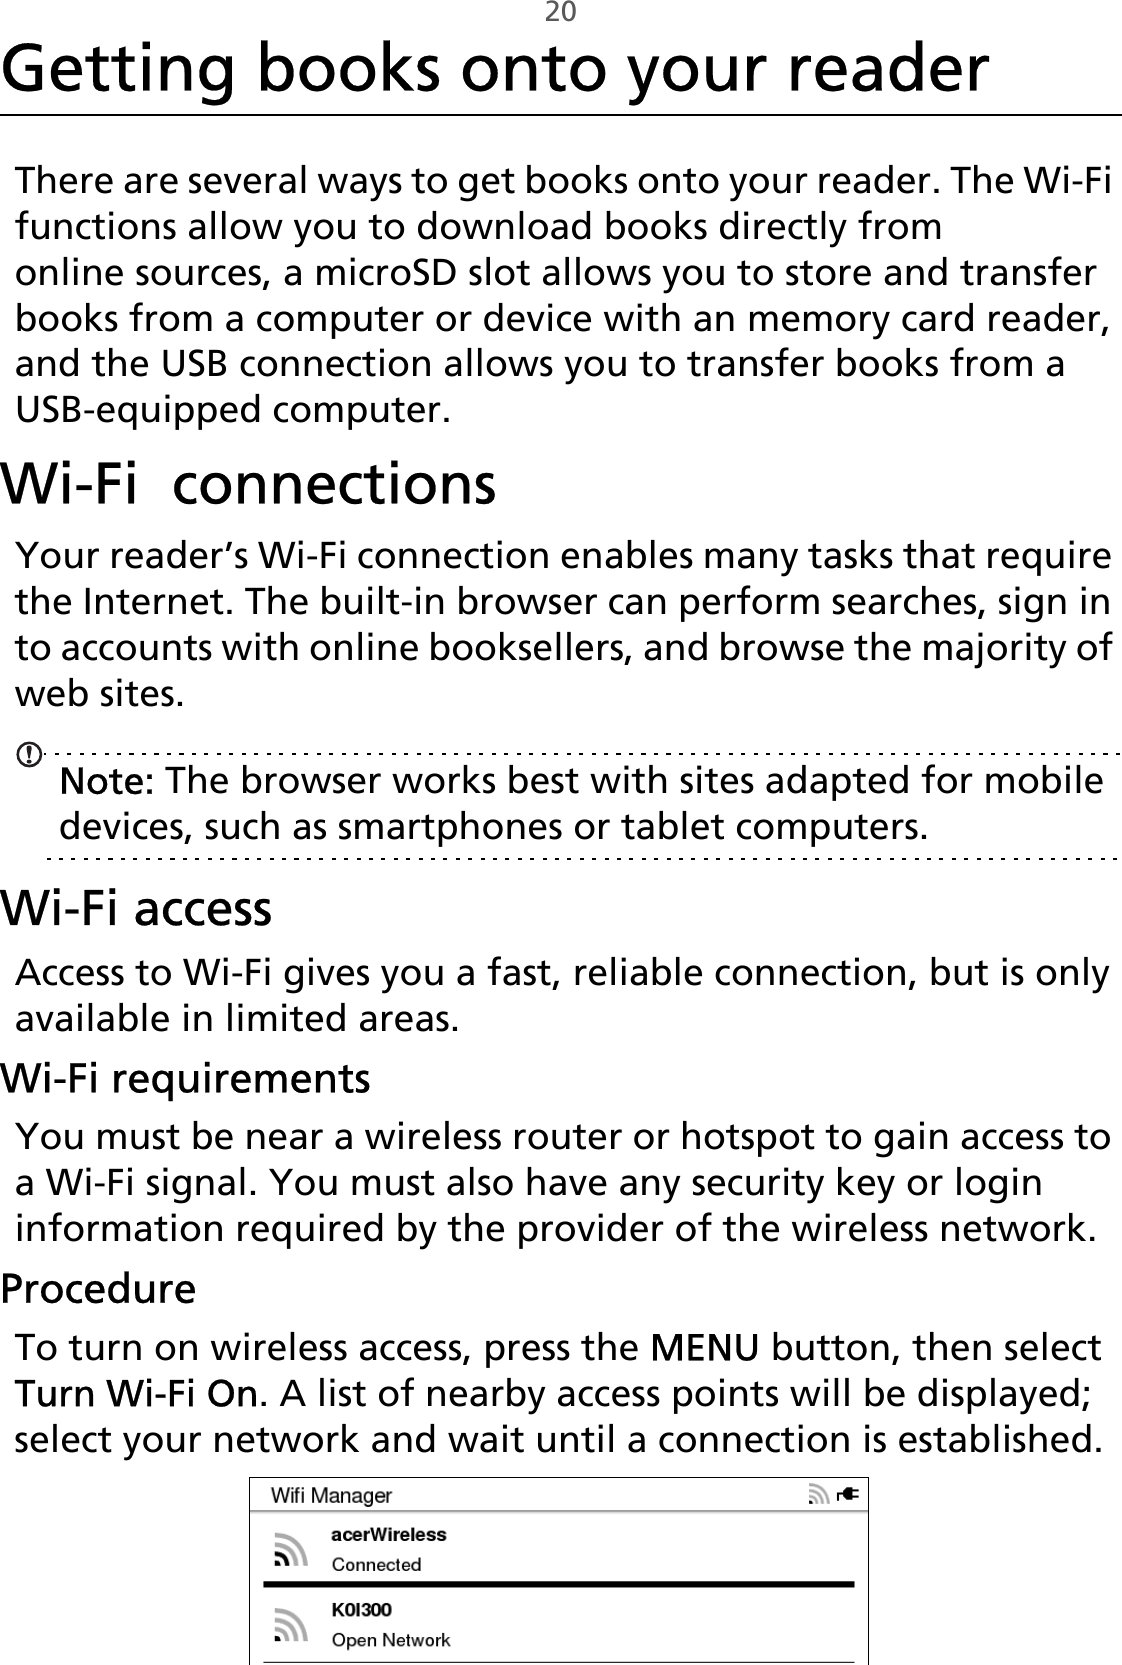 20Getting books onto your readerThere are several ways to get books onto your reader. The Wi-Fi functions allow you to download books directly from online sources, a microSD slot allows you to store and transfer books from a computer or device with an memory card reader, and the USB connection allows you to transfer books from a USB-equipped computer.Wi-Fi  connectionsYour reader’s Wi-Fi connection enables many tasks that require the Internet. The built-in browser can perform searches, sign in to accounts with online booksellers, and browse the majority of web sites.Note: The browser works best with sites adapted for mobile devices, such as smartphones or tablet computers.Wi-Fi accessAccess to Wi-Fi gives you a fast, reliable connection, but is only available in limited areas.Wi-Fi requirementsYou must be near a wireless router or hotspot to gain access to a Wi-Fi signal. You must also have any security key or login information required by the provider of the wireless network. ProcedureTo turn on wireless access, press the MENU button, then select Turn Wi-Fi On. A list of nearby access points will be displayed; select your network and wait until a connection is established. 